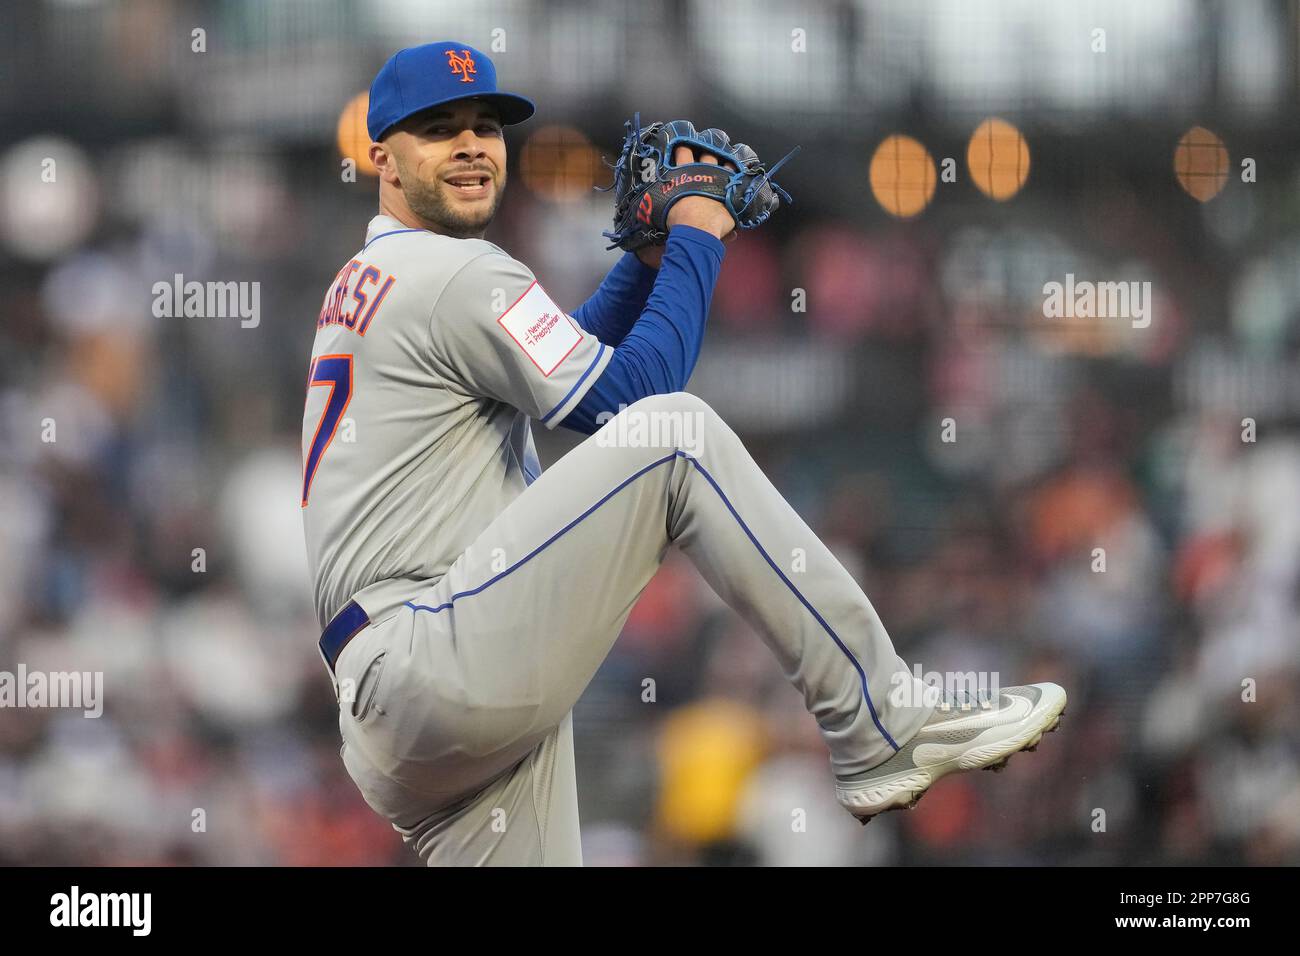 New York Mets pitcher Joey Lucchesi during a baseball game against the ...